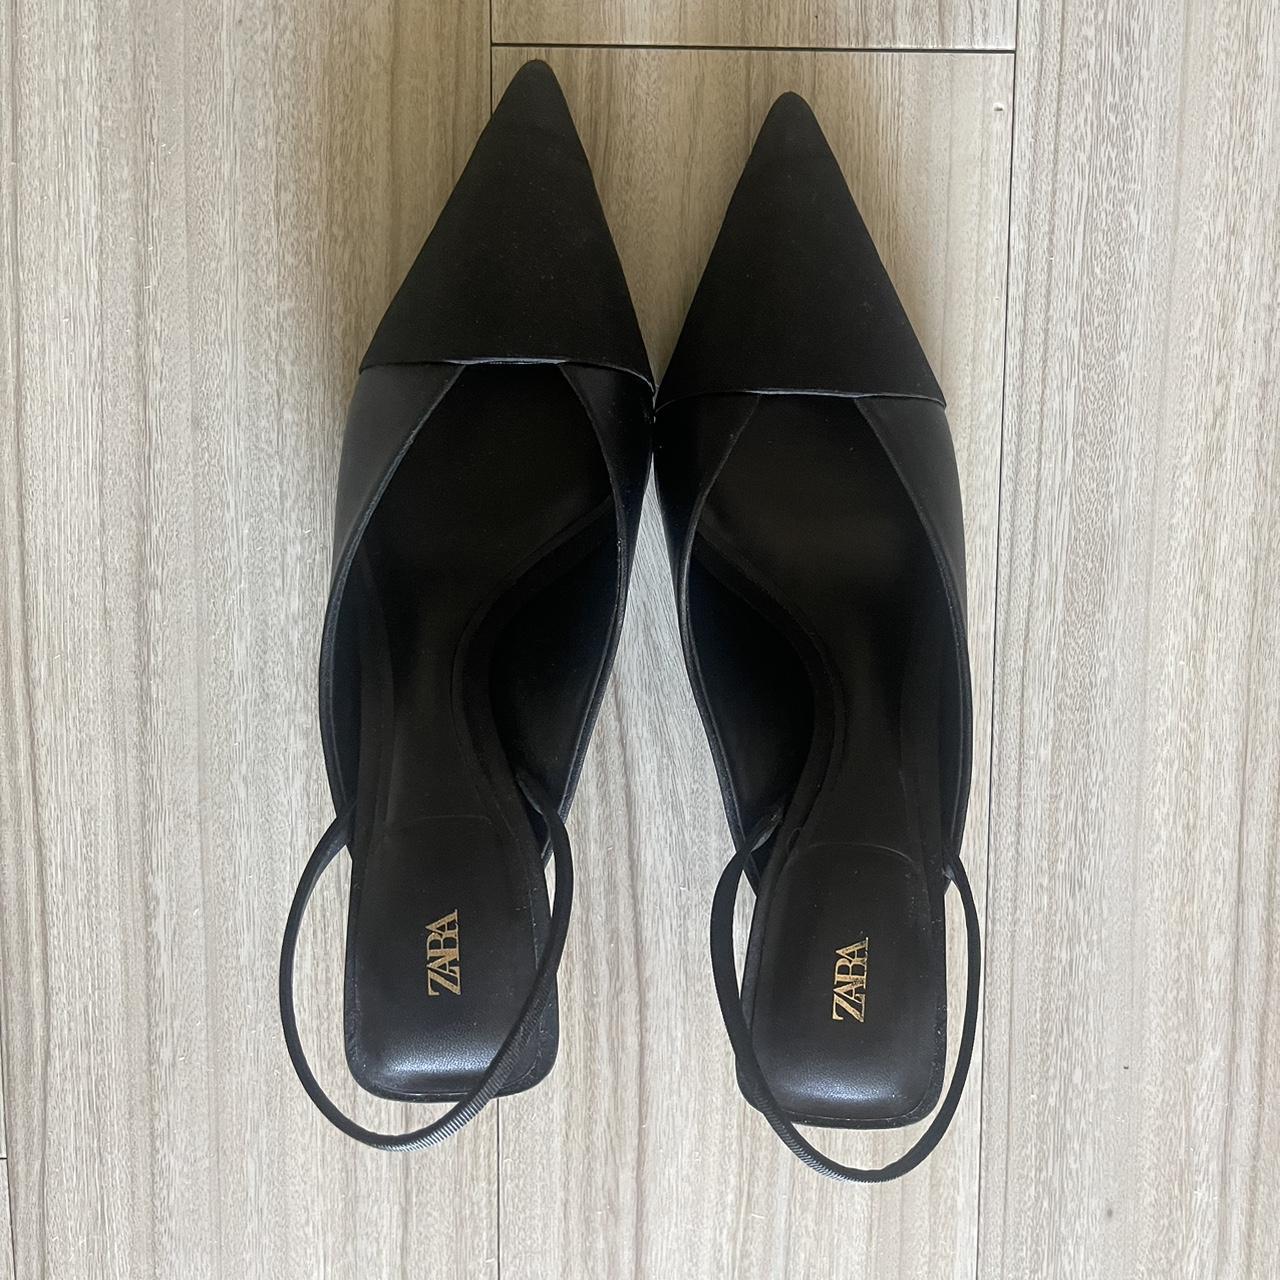 Zara Women's Black and Gold Courts